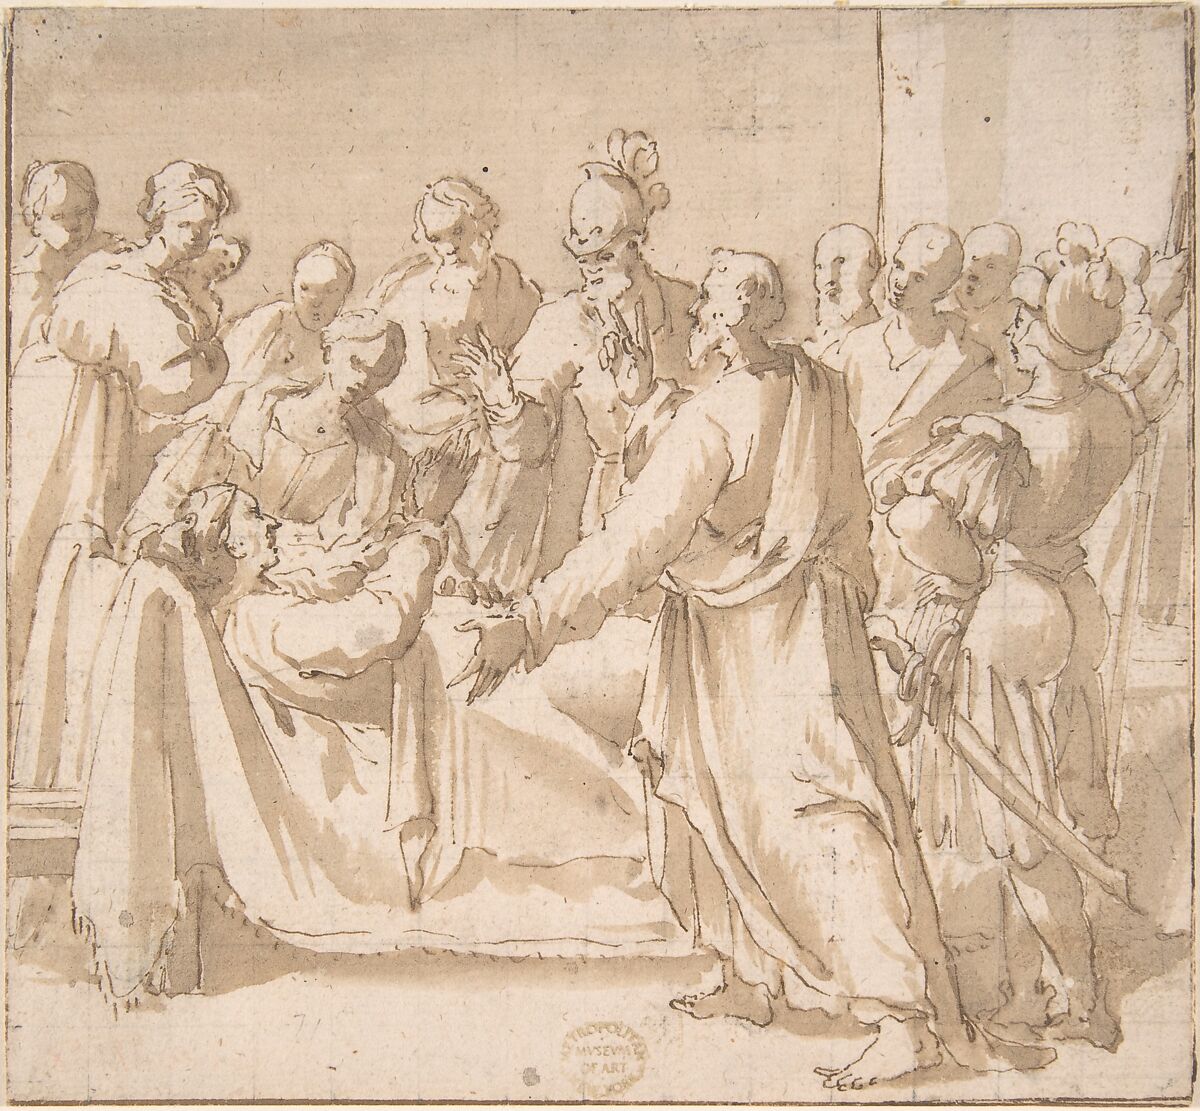 A Deathbed Scene, Anonymous, Italian, Roman-Bolognese, 17th century, Pen and brown ink, brush and brown wash, over traces of black chalk on light tan paper. Squared in black chalk 